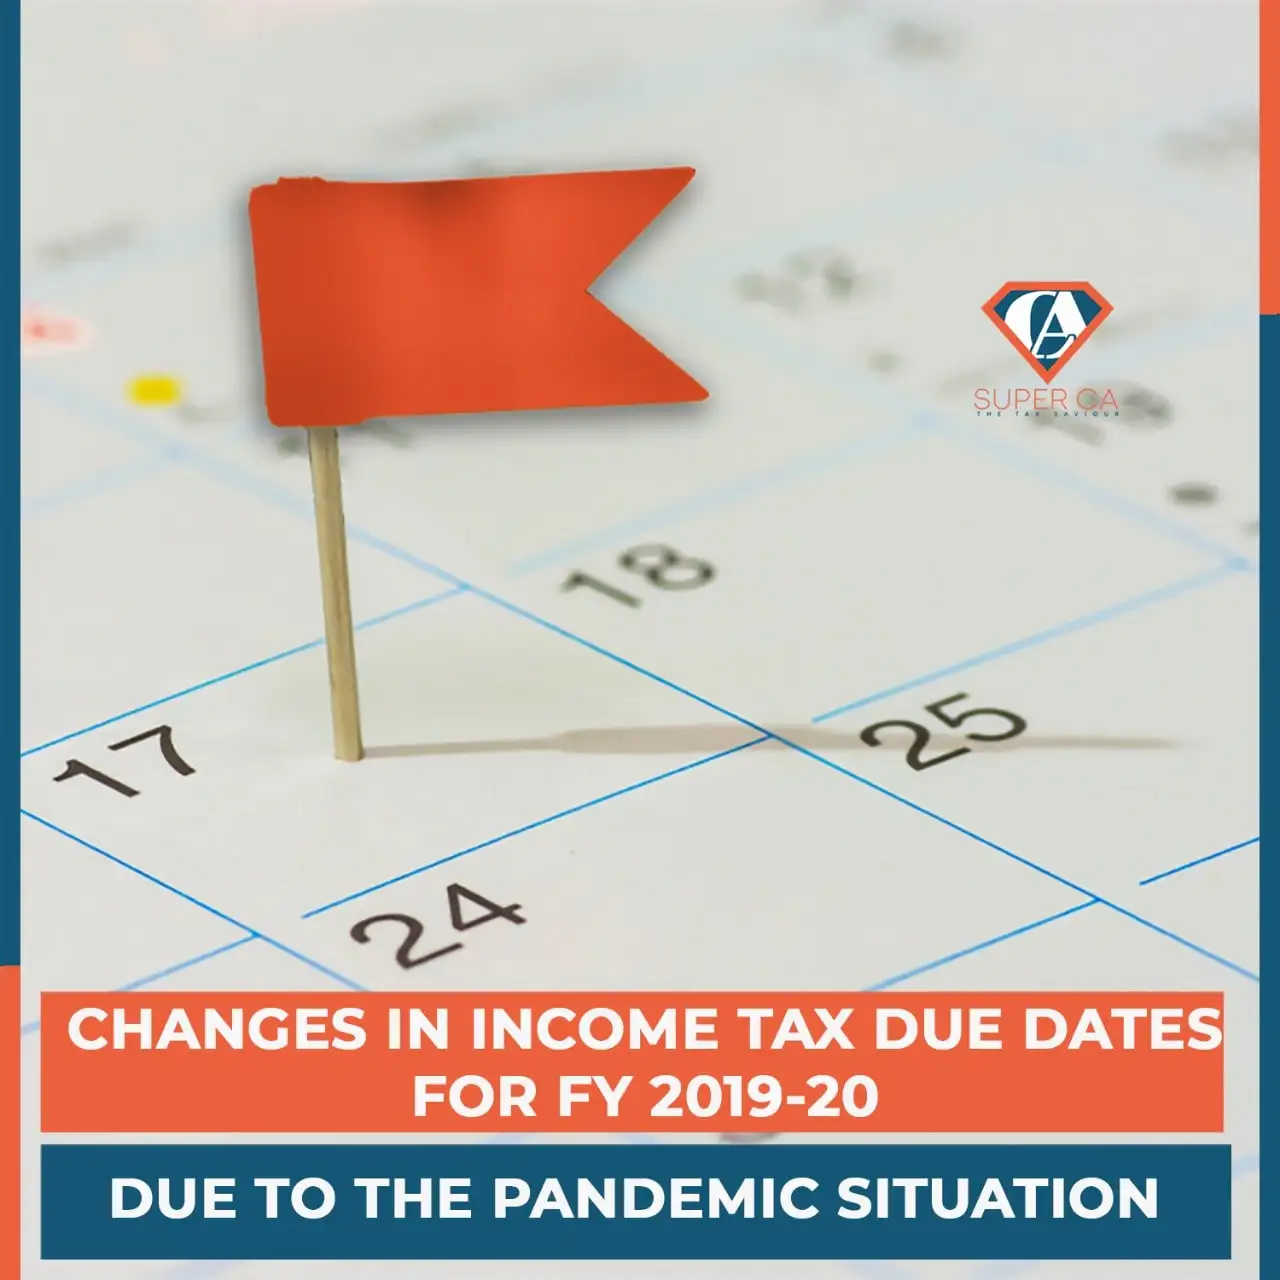 INCOME TAX DUE DATES